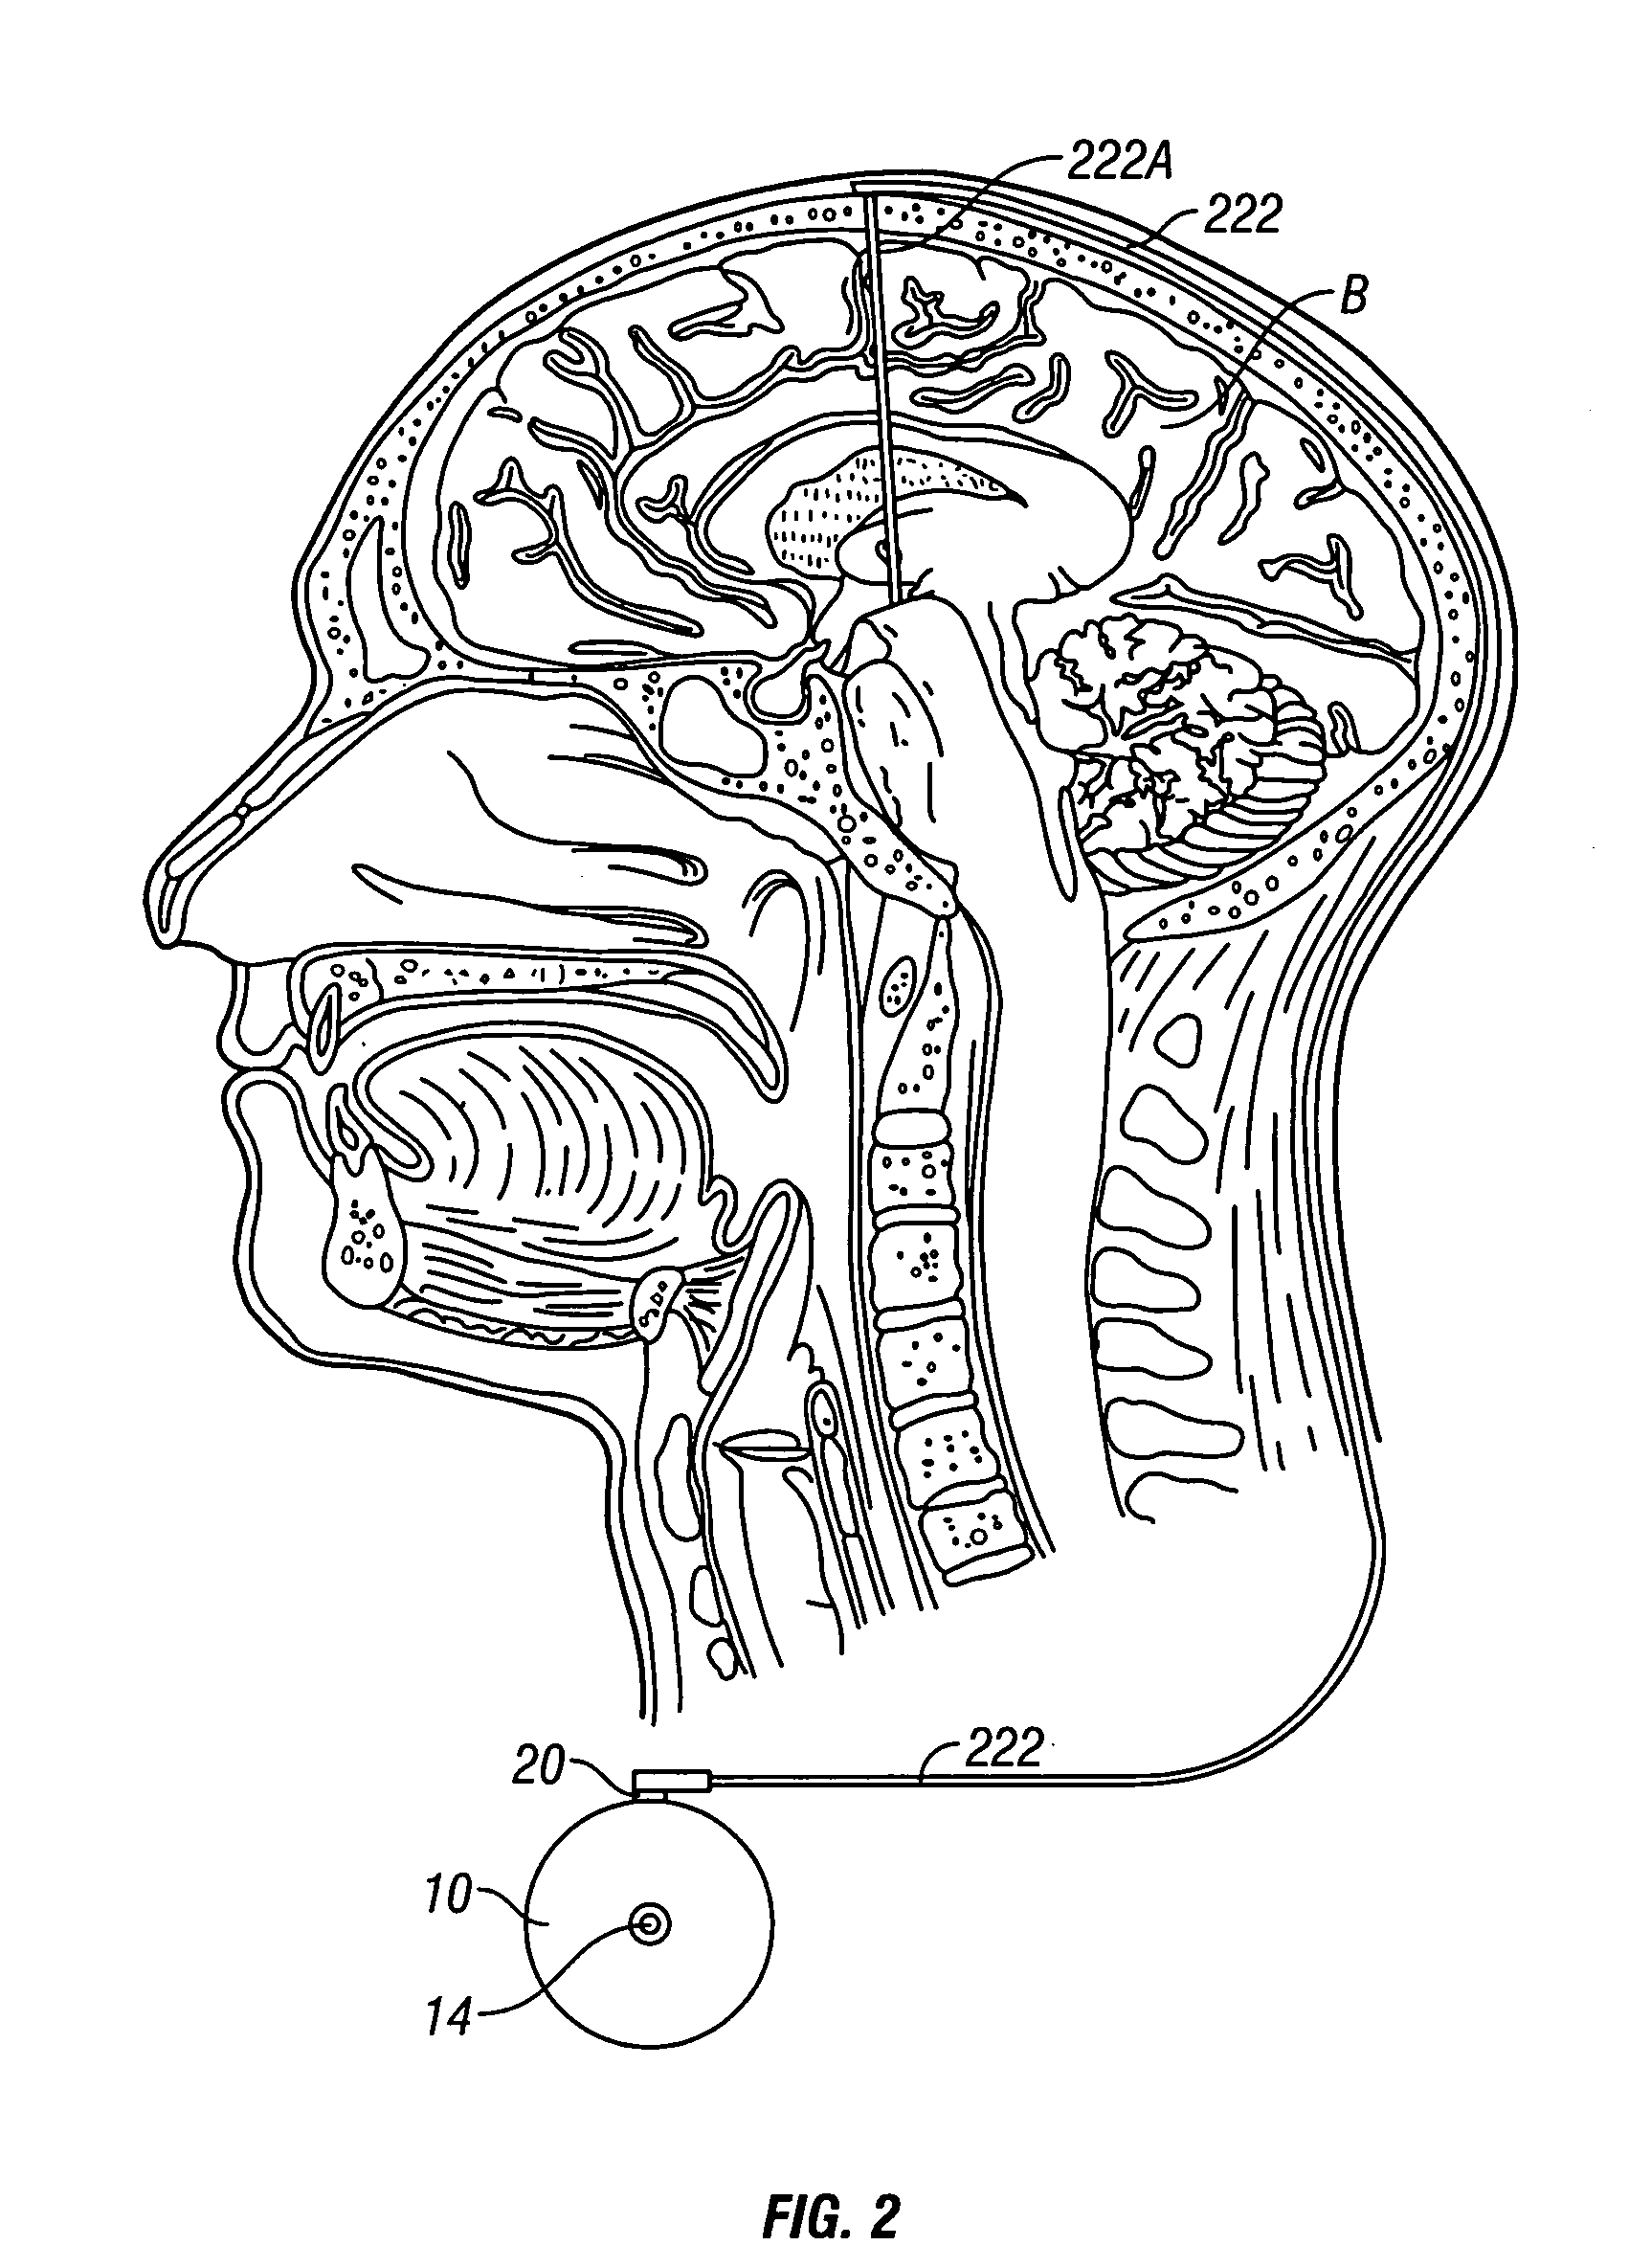 System and method of treating stuttering by neuromodulation